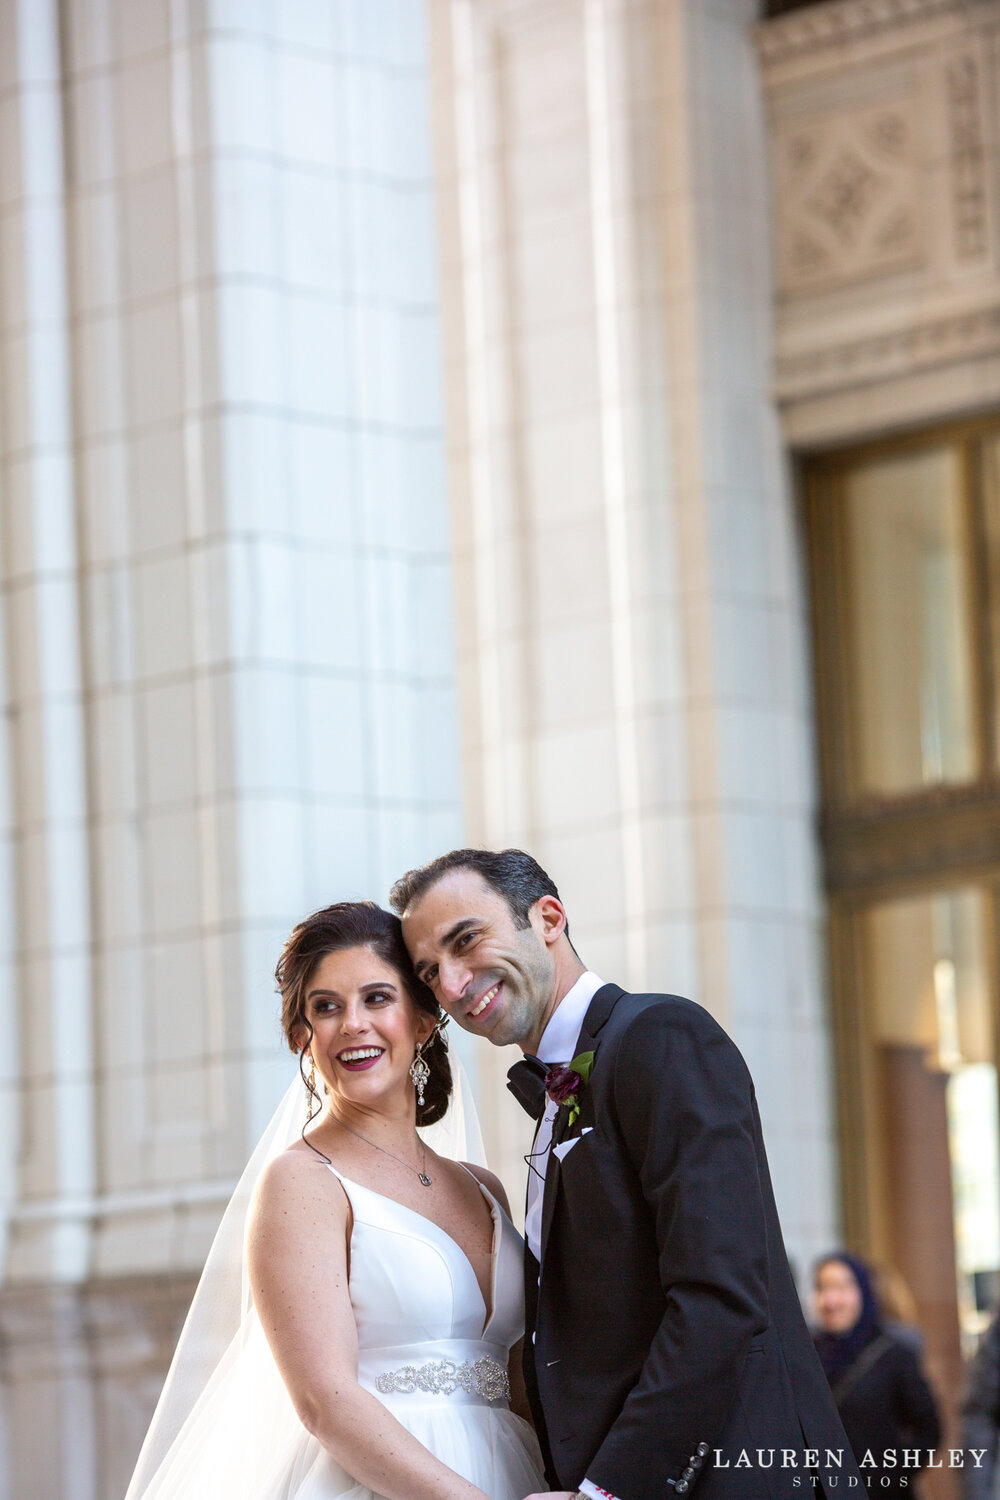 intercontinental-chicago-high-end-michigan-ave-magnificent-mile-wedding-chicago-wedding-photography-31.jpg